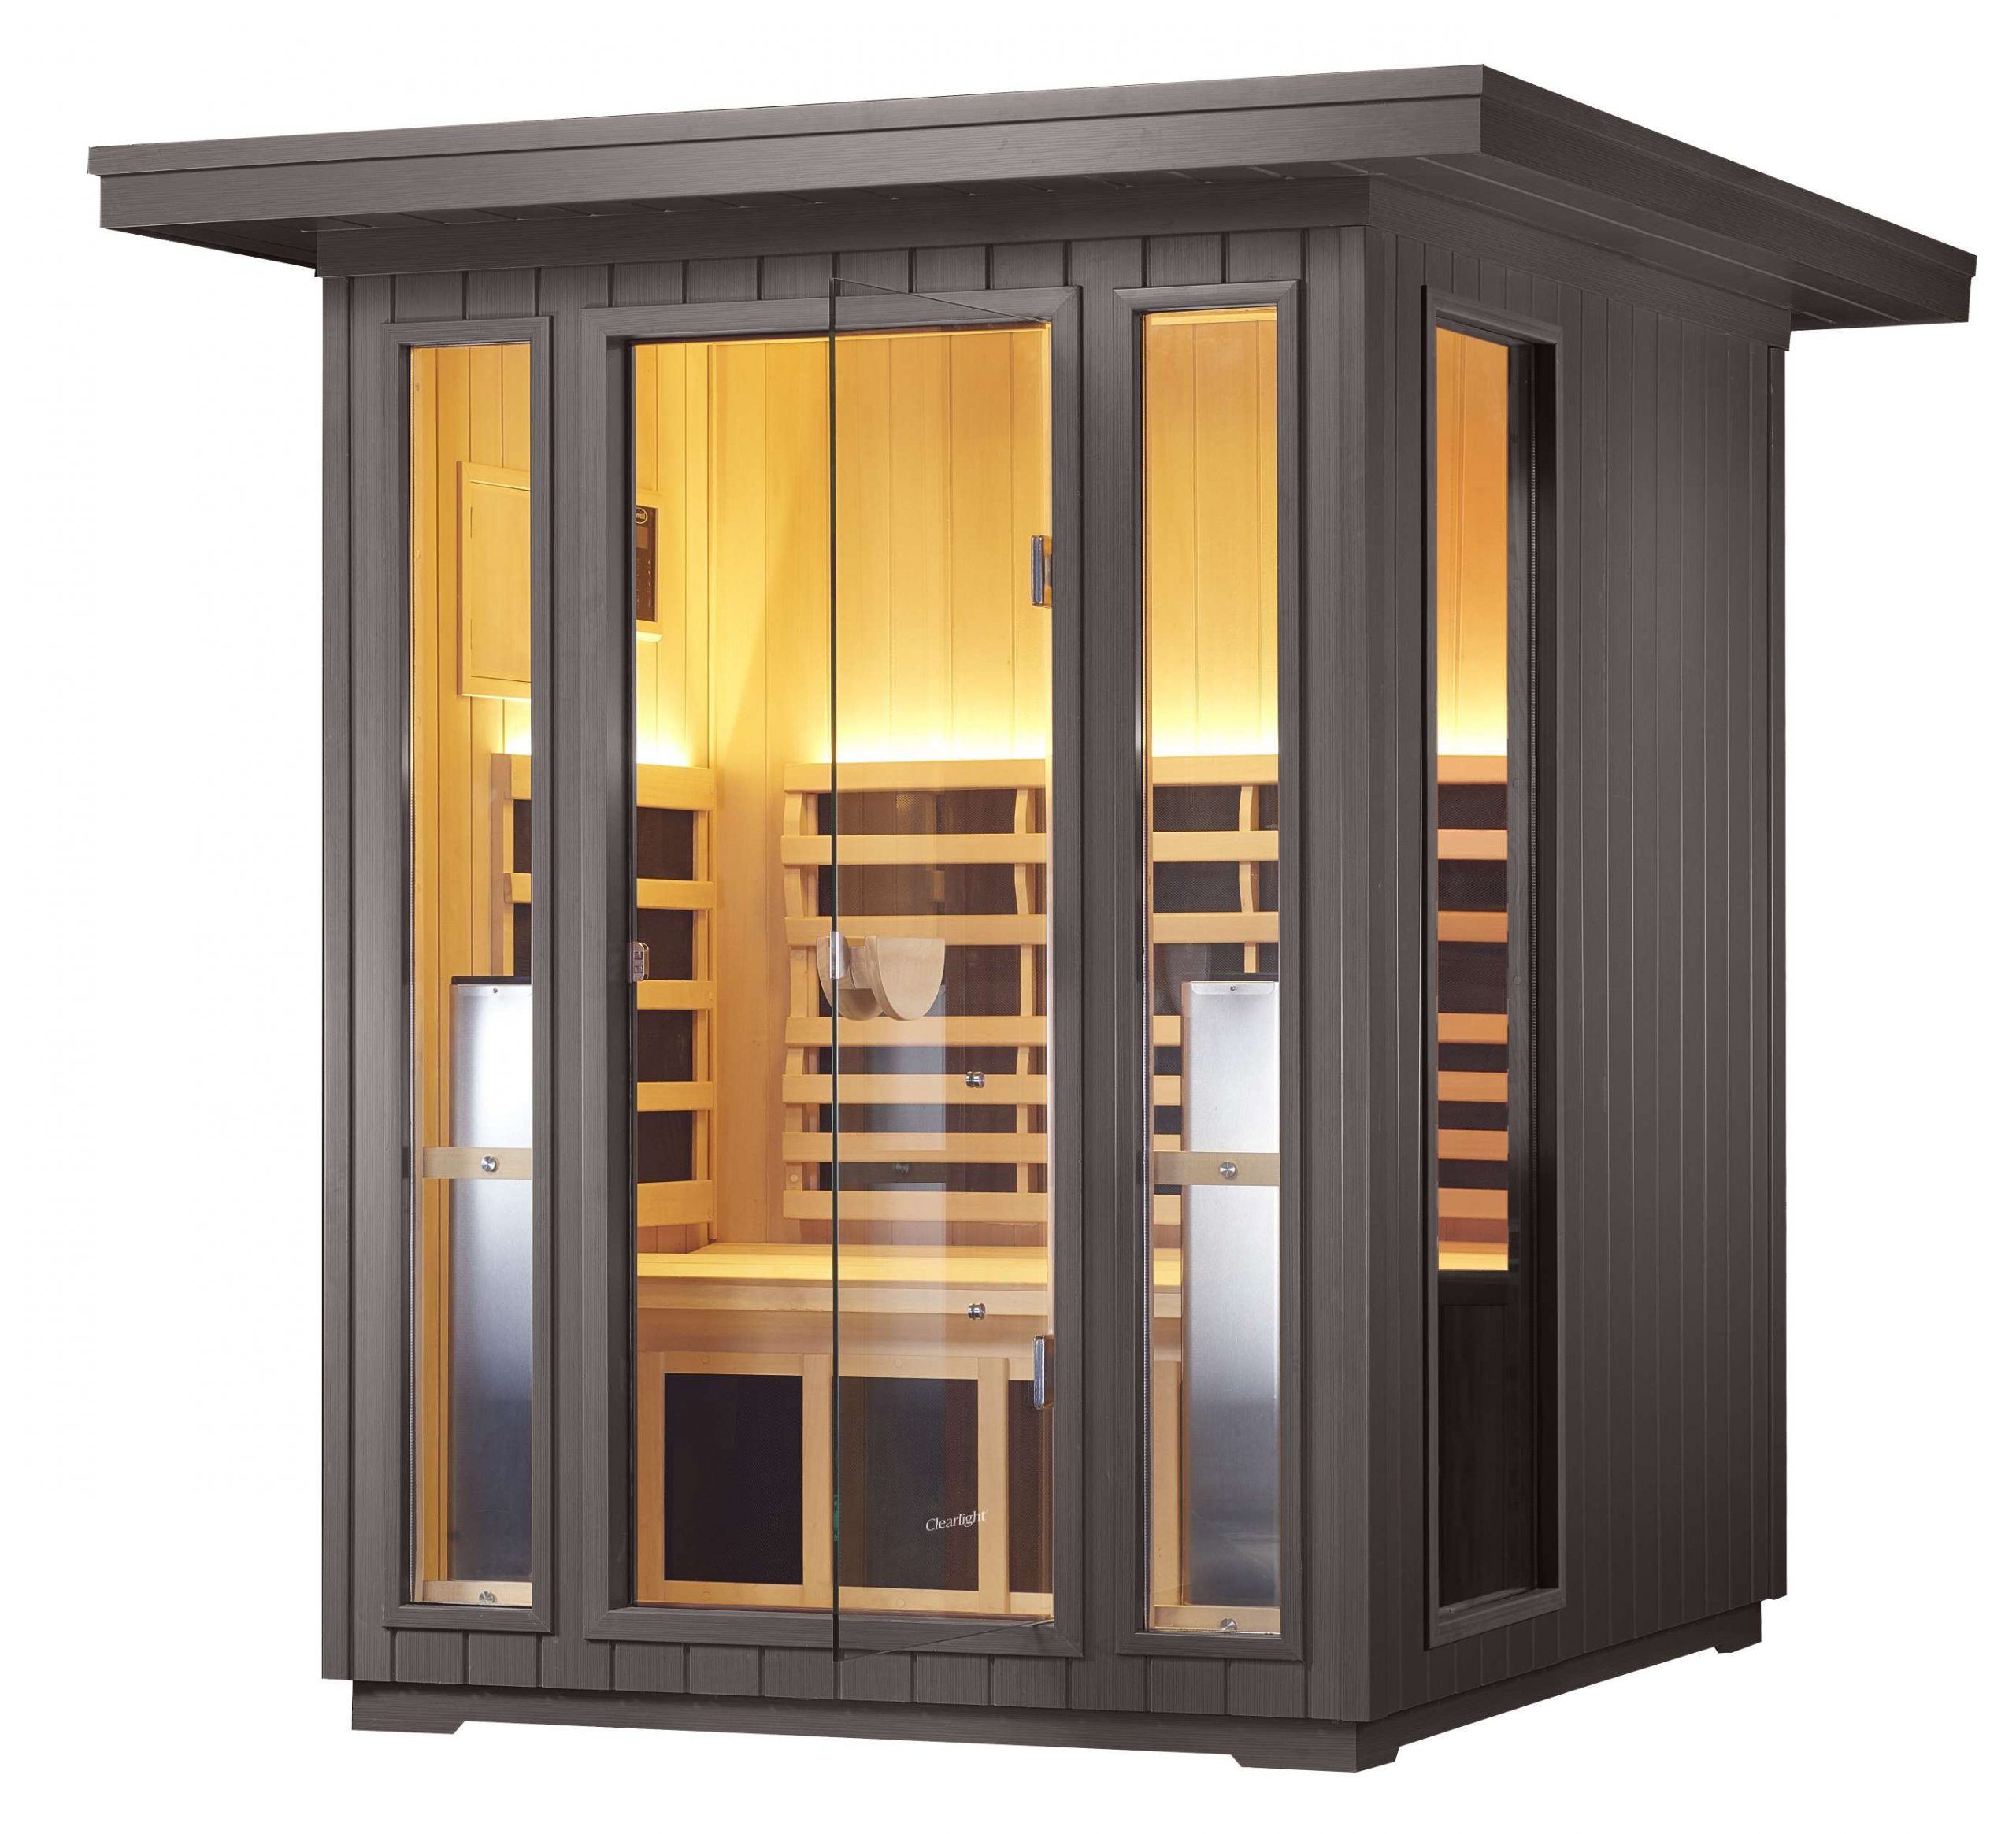 Clearlight Sanctuary Outdoor 5 Infrared Sauna Front